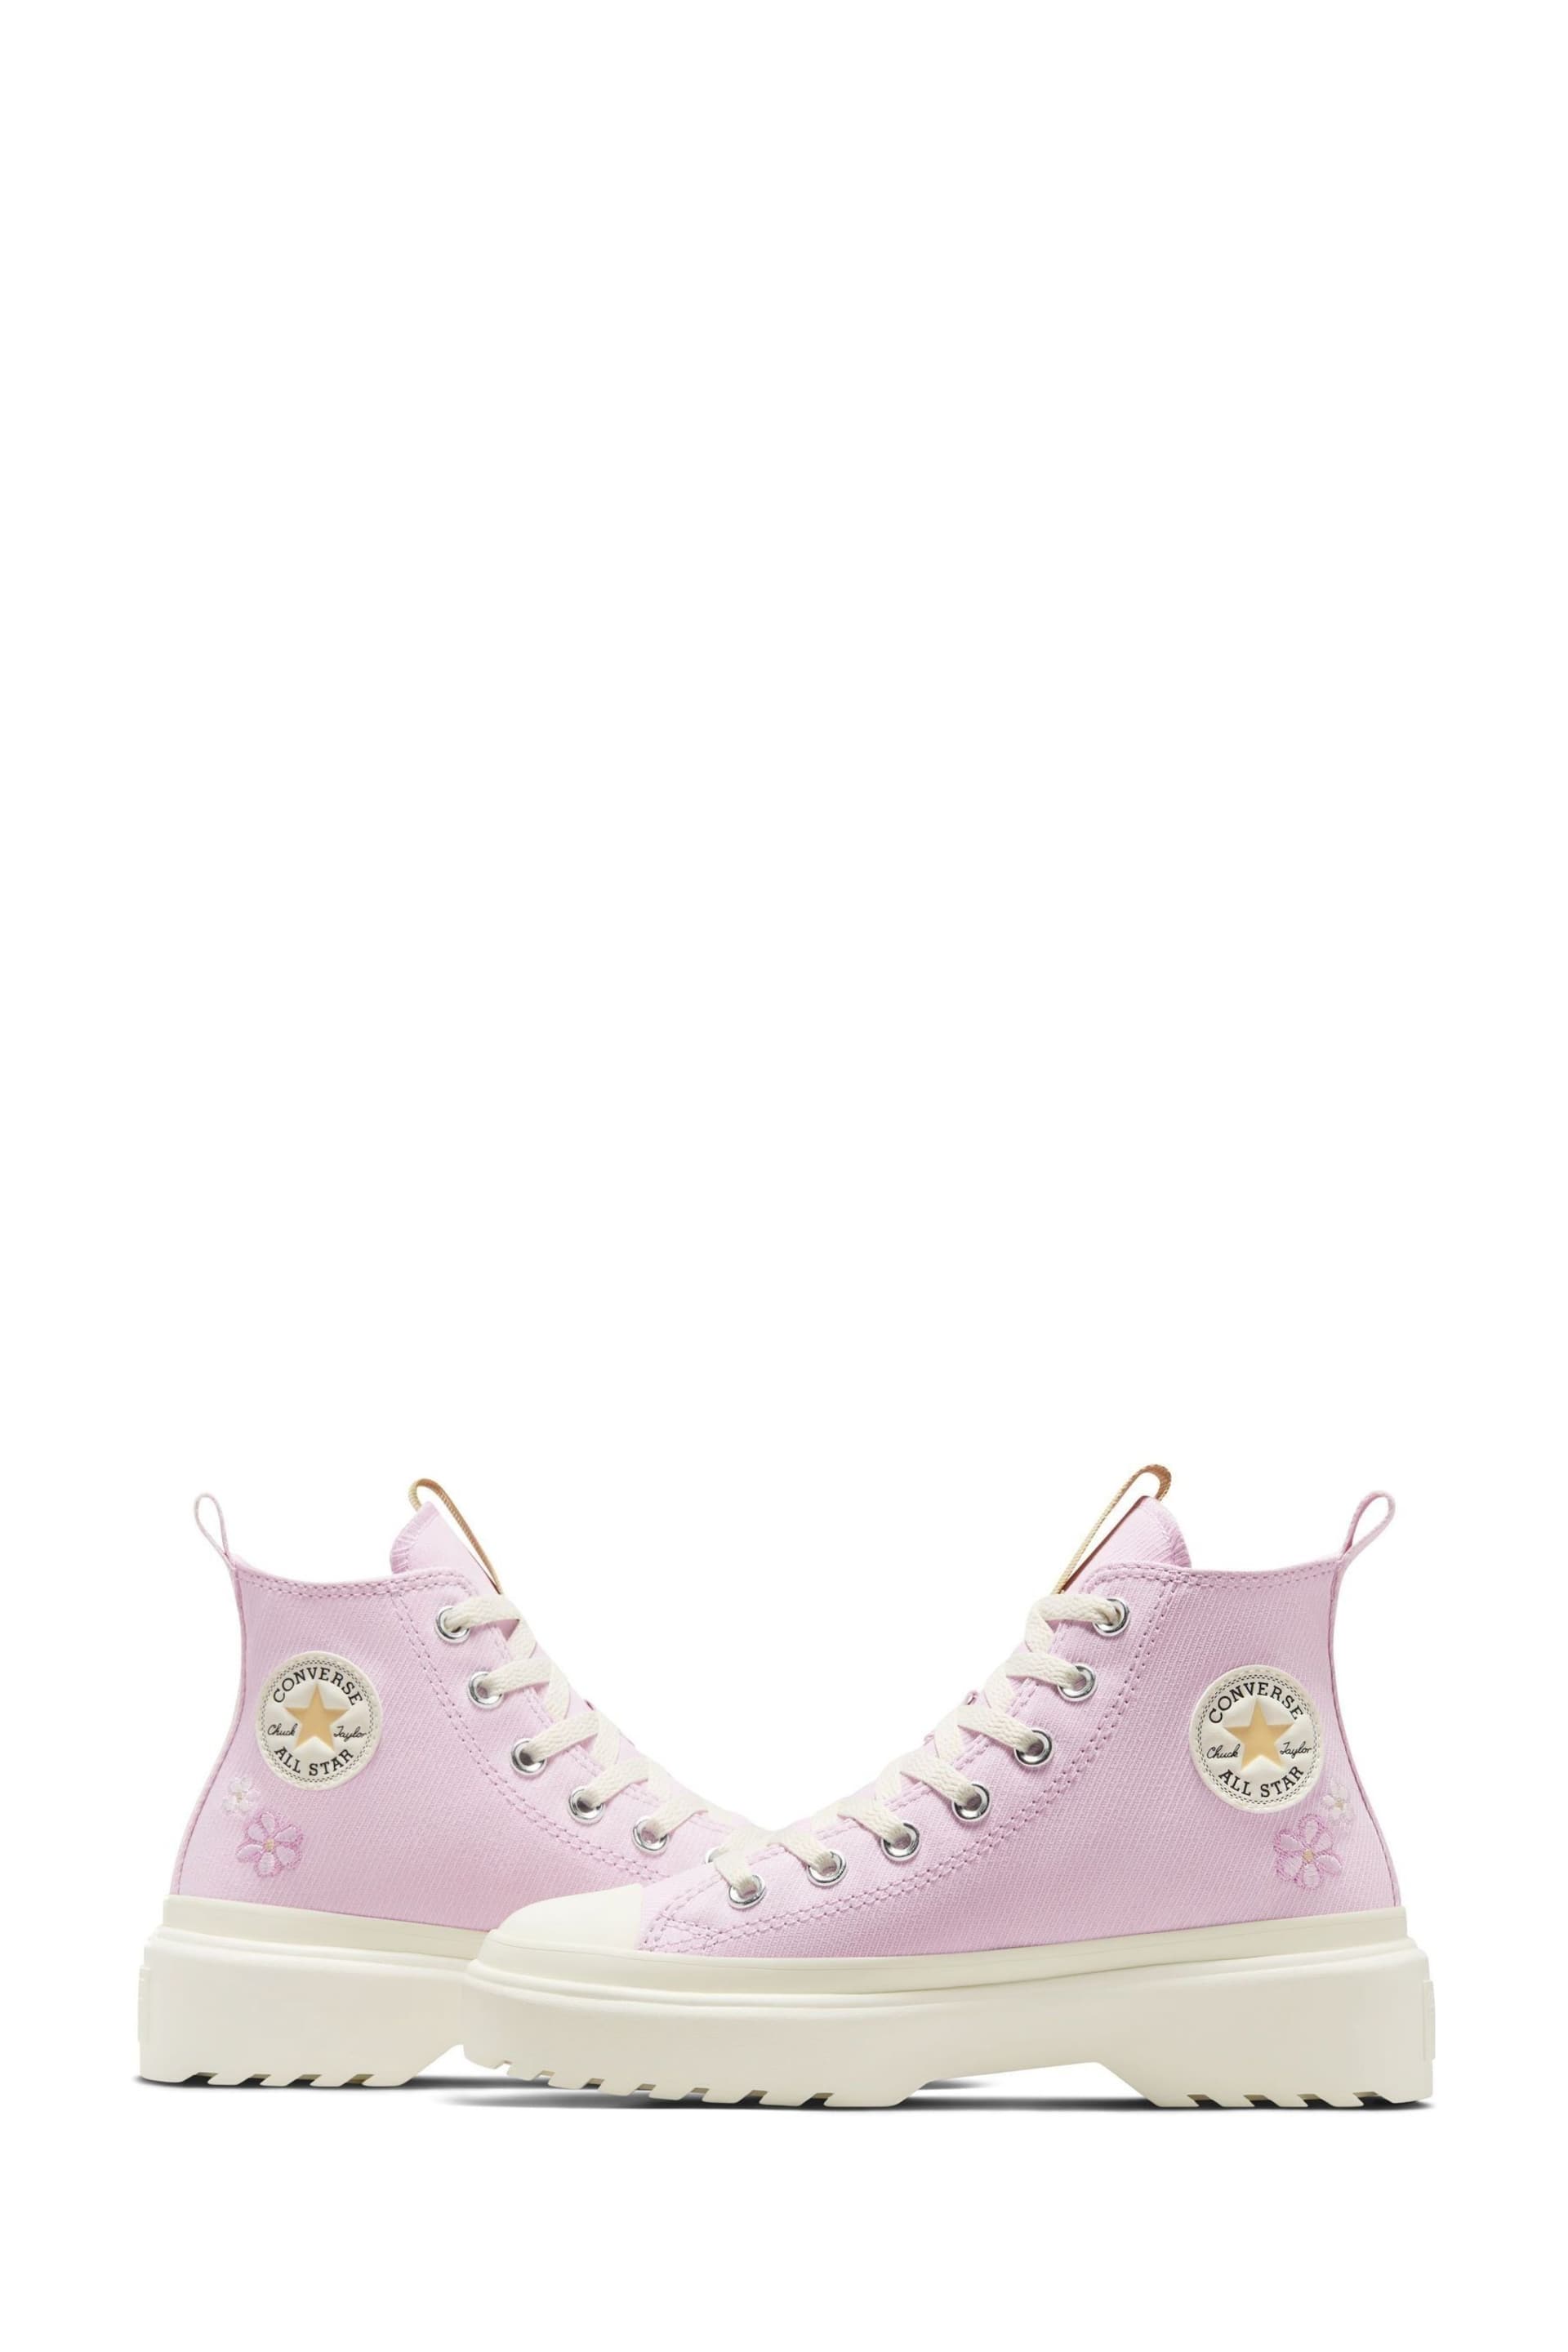 Converse Purple Chuck Taylor Flower Embroidered Lugged Lift Junior Trainers - Image 12 of 12